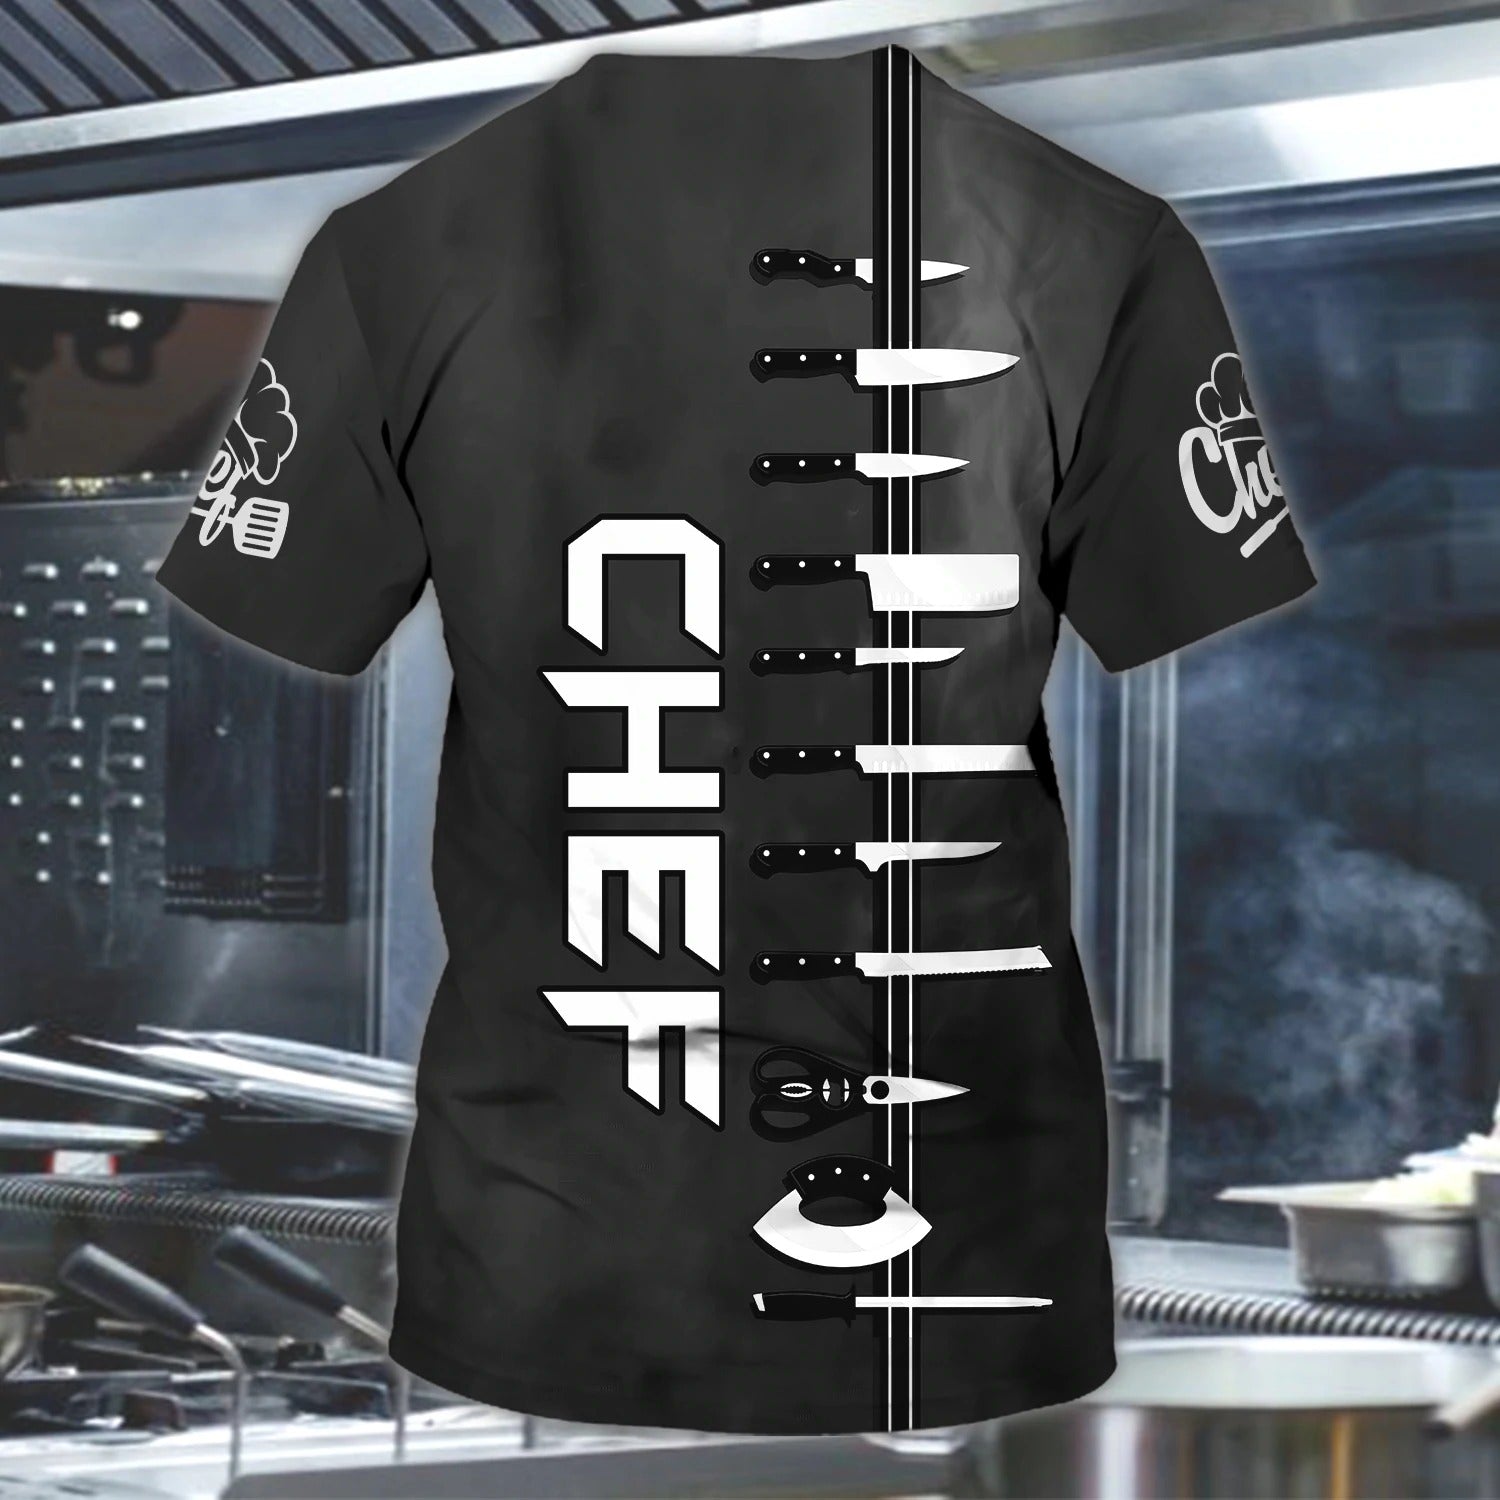 Personalized Name 3D Chef/ Master Chef Tshirt/ Best Gift For Cooking Lover/ 3D Full Print Cooker Shirt/ Chef Shirt